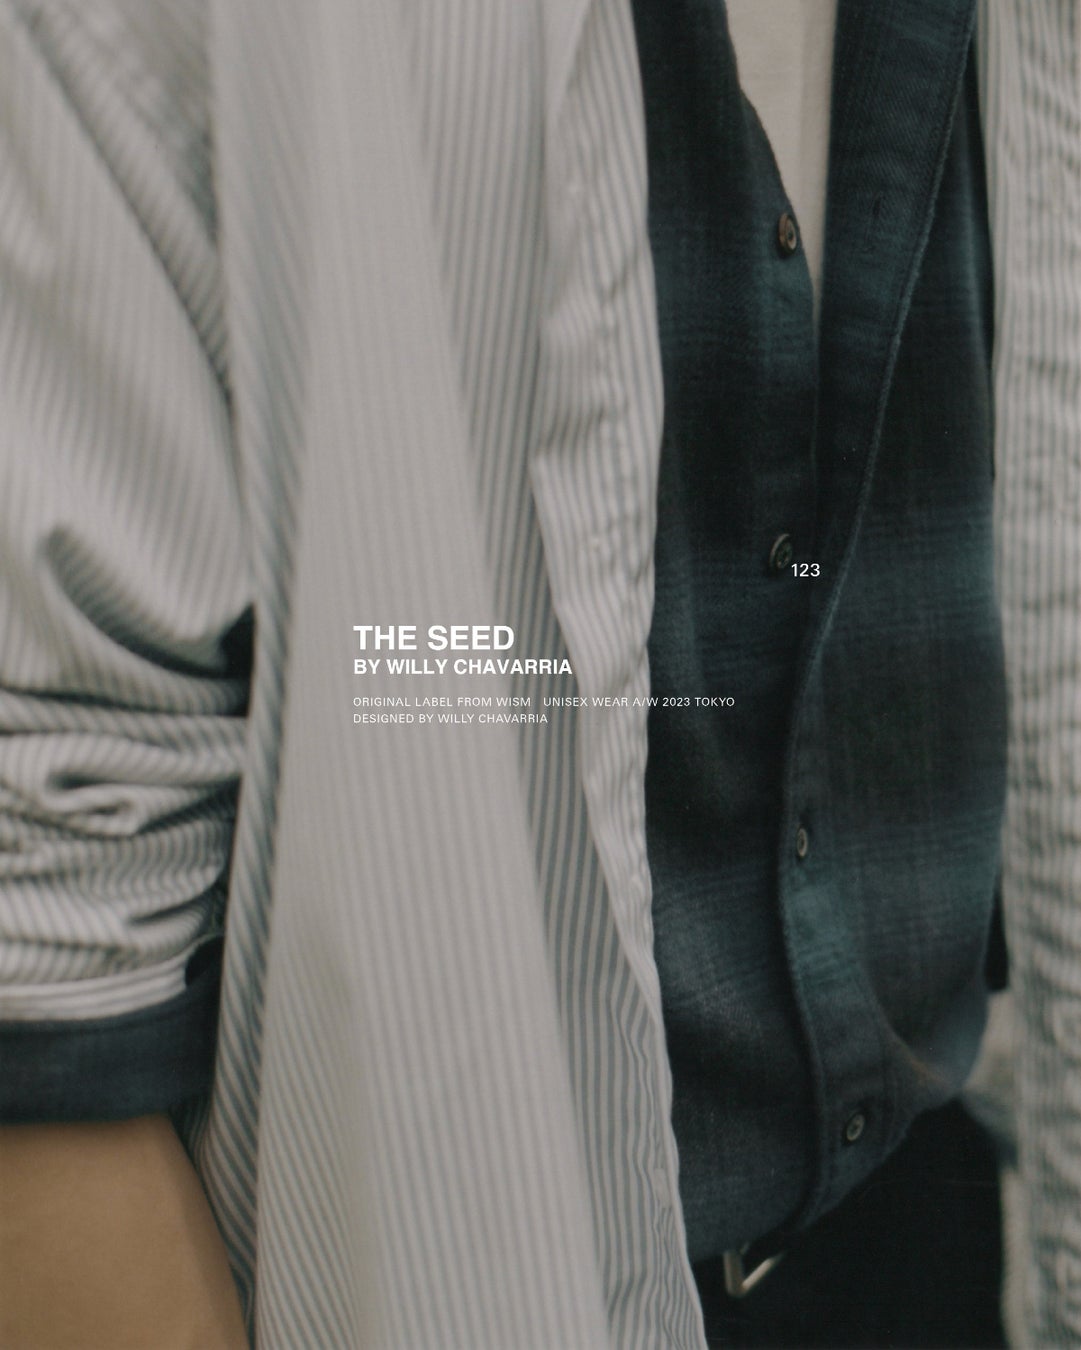 WISMオリジナルレーベル 『 THE SEED BY WILLY CHAVARRIA 』2023AW シーズンヴィジュアル 第一弾公開 のお知らせ